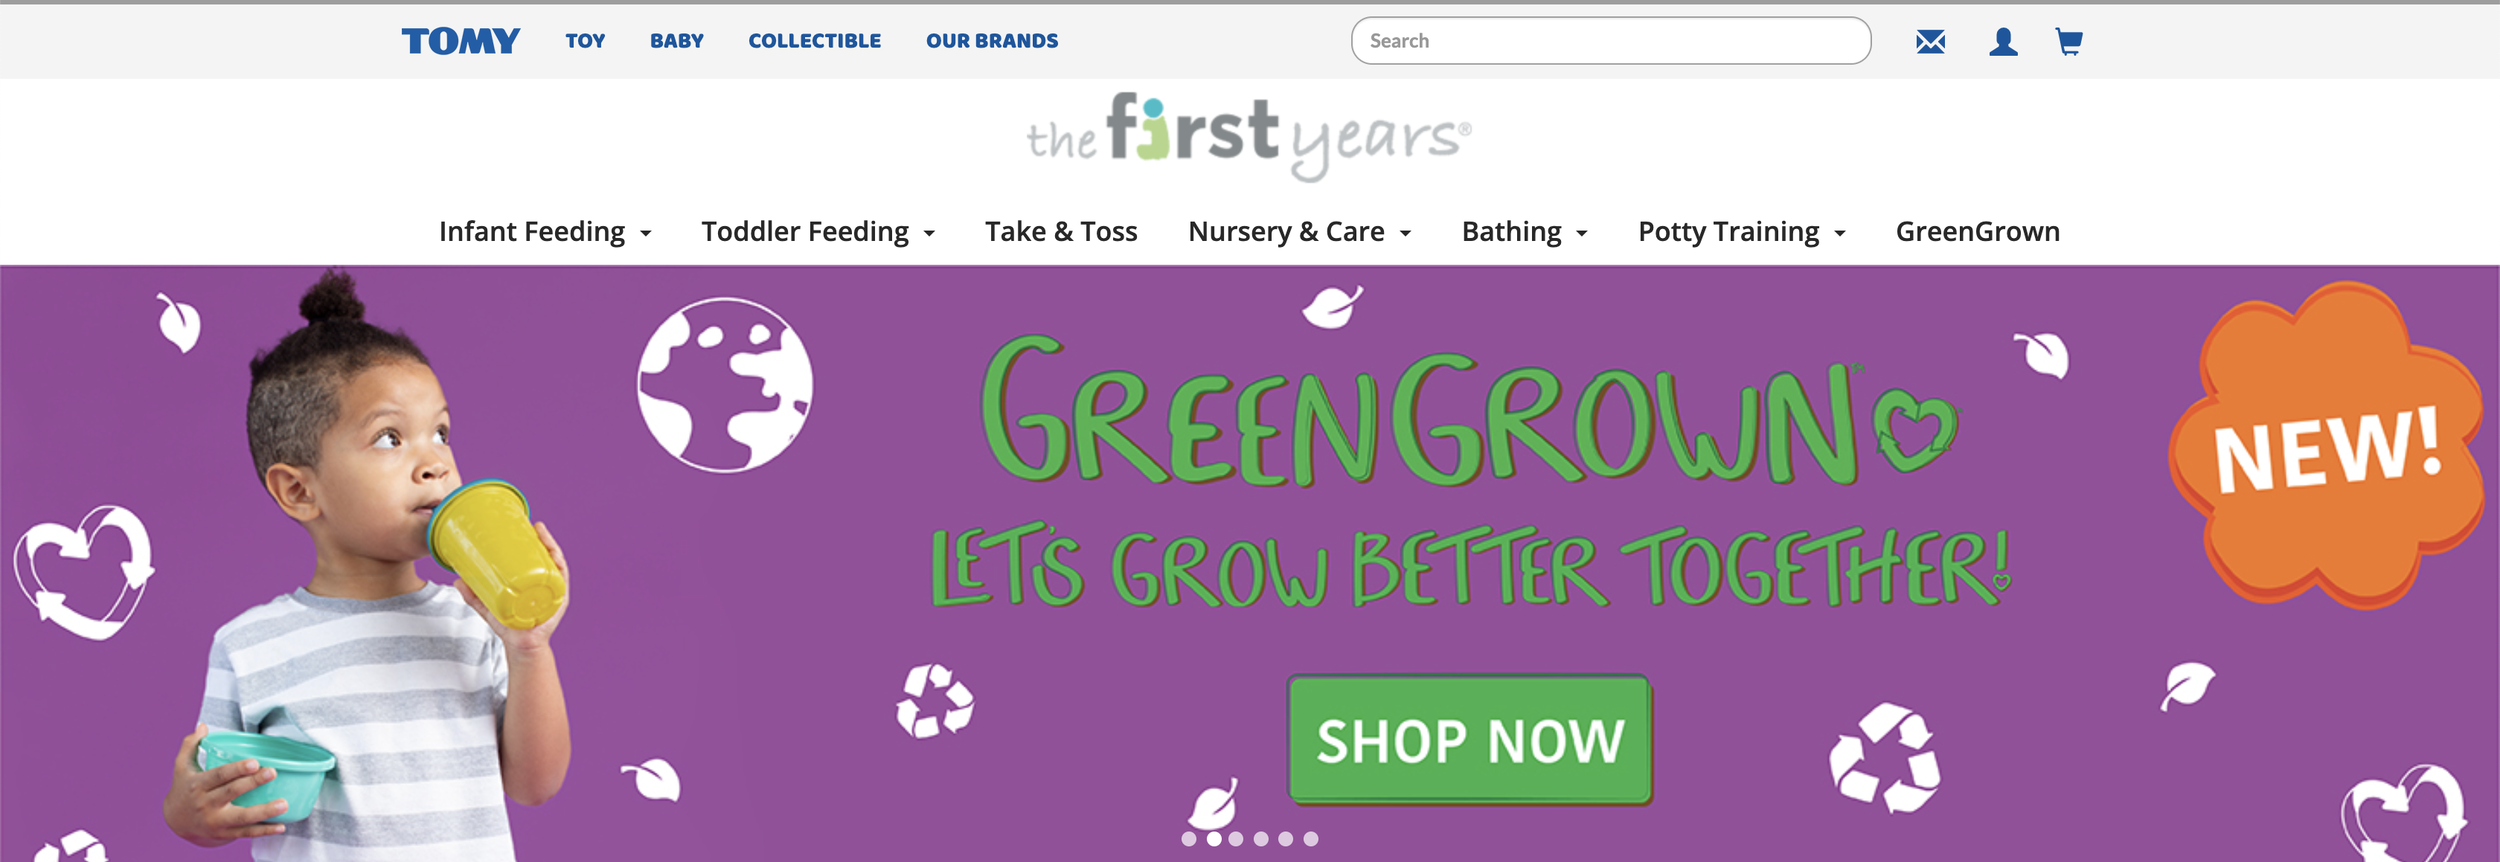 The First Years GreenGrown Web Banner 